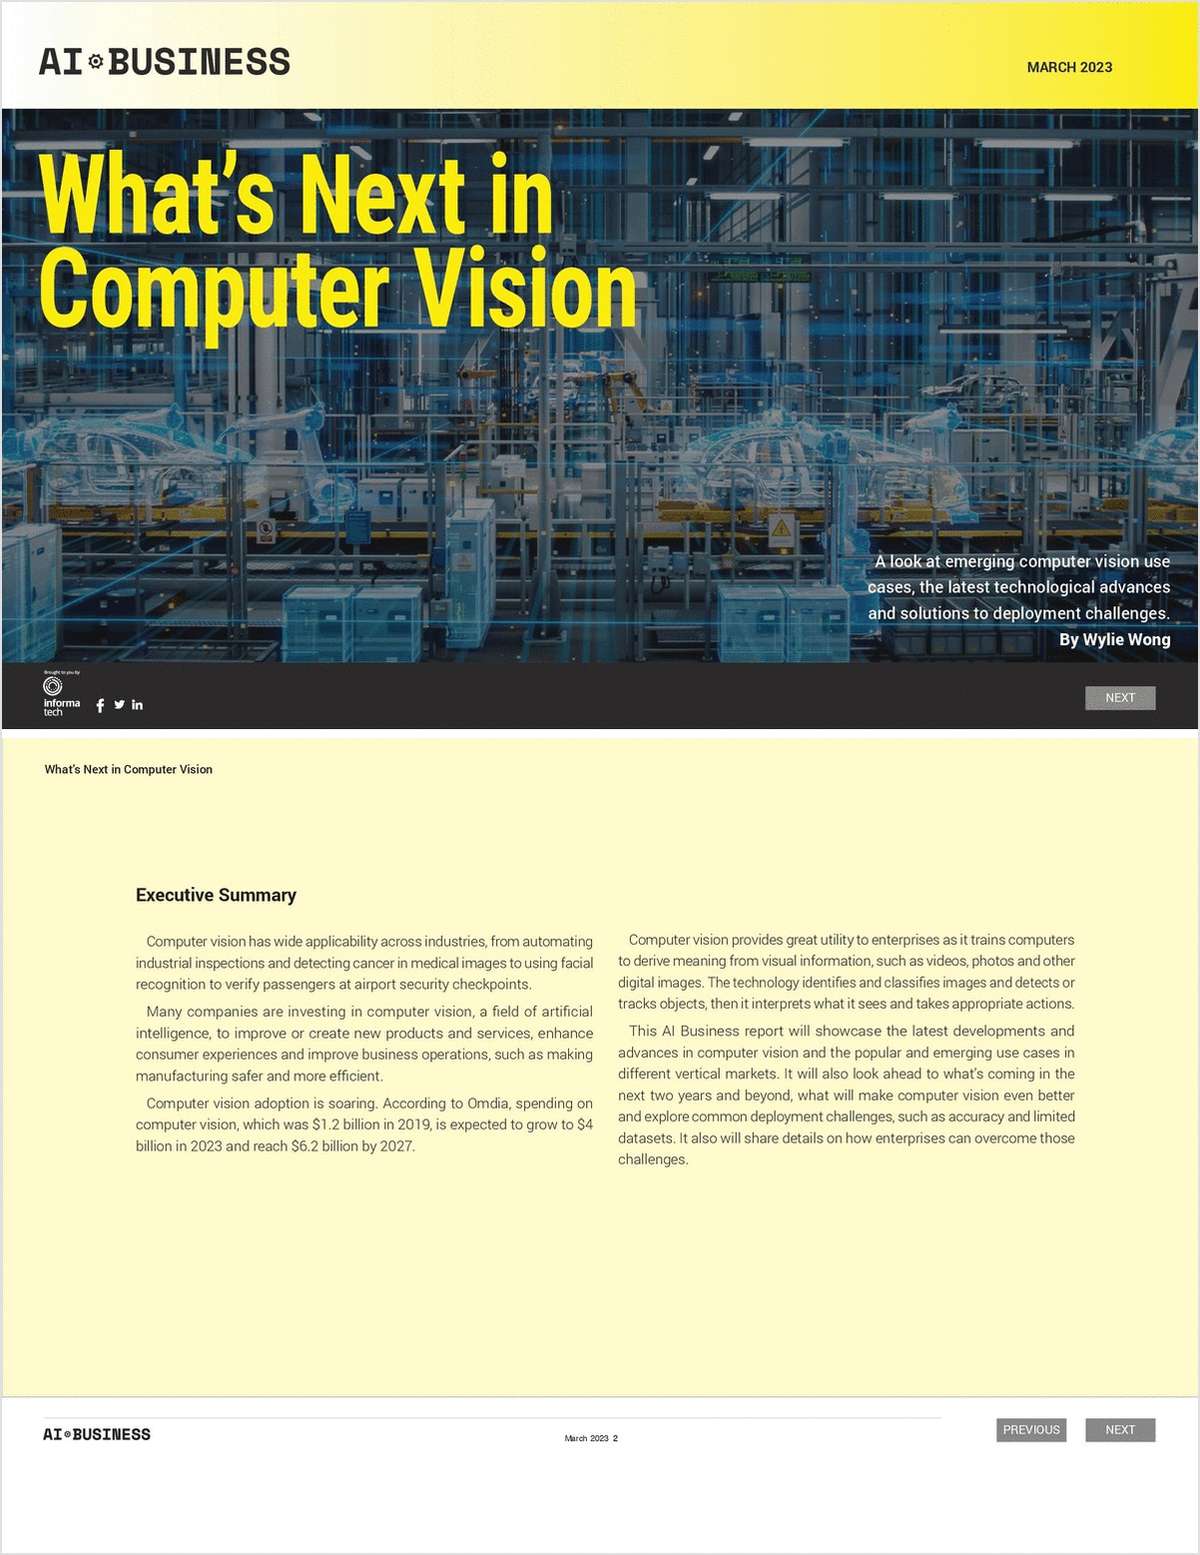 What's Next in Computer Vision